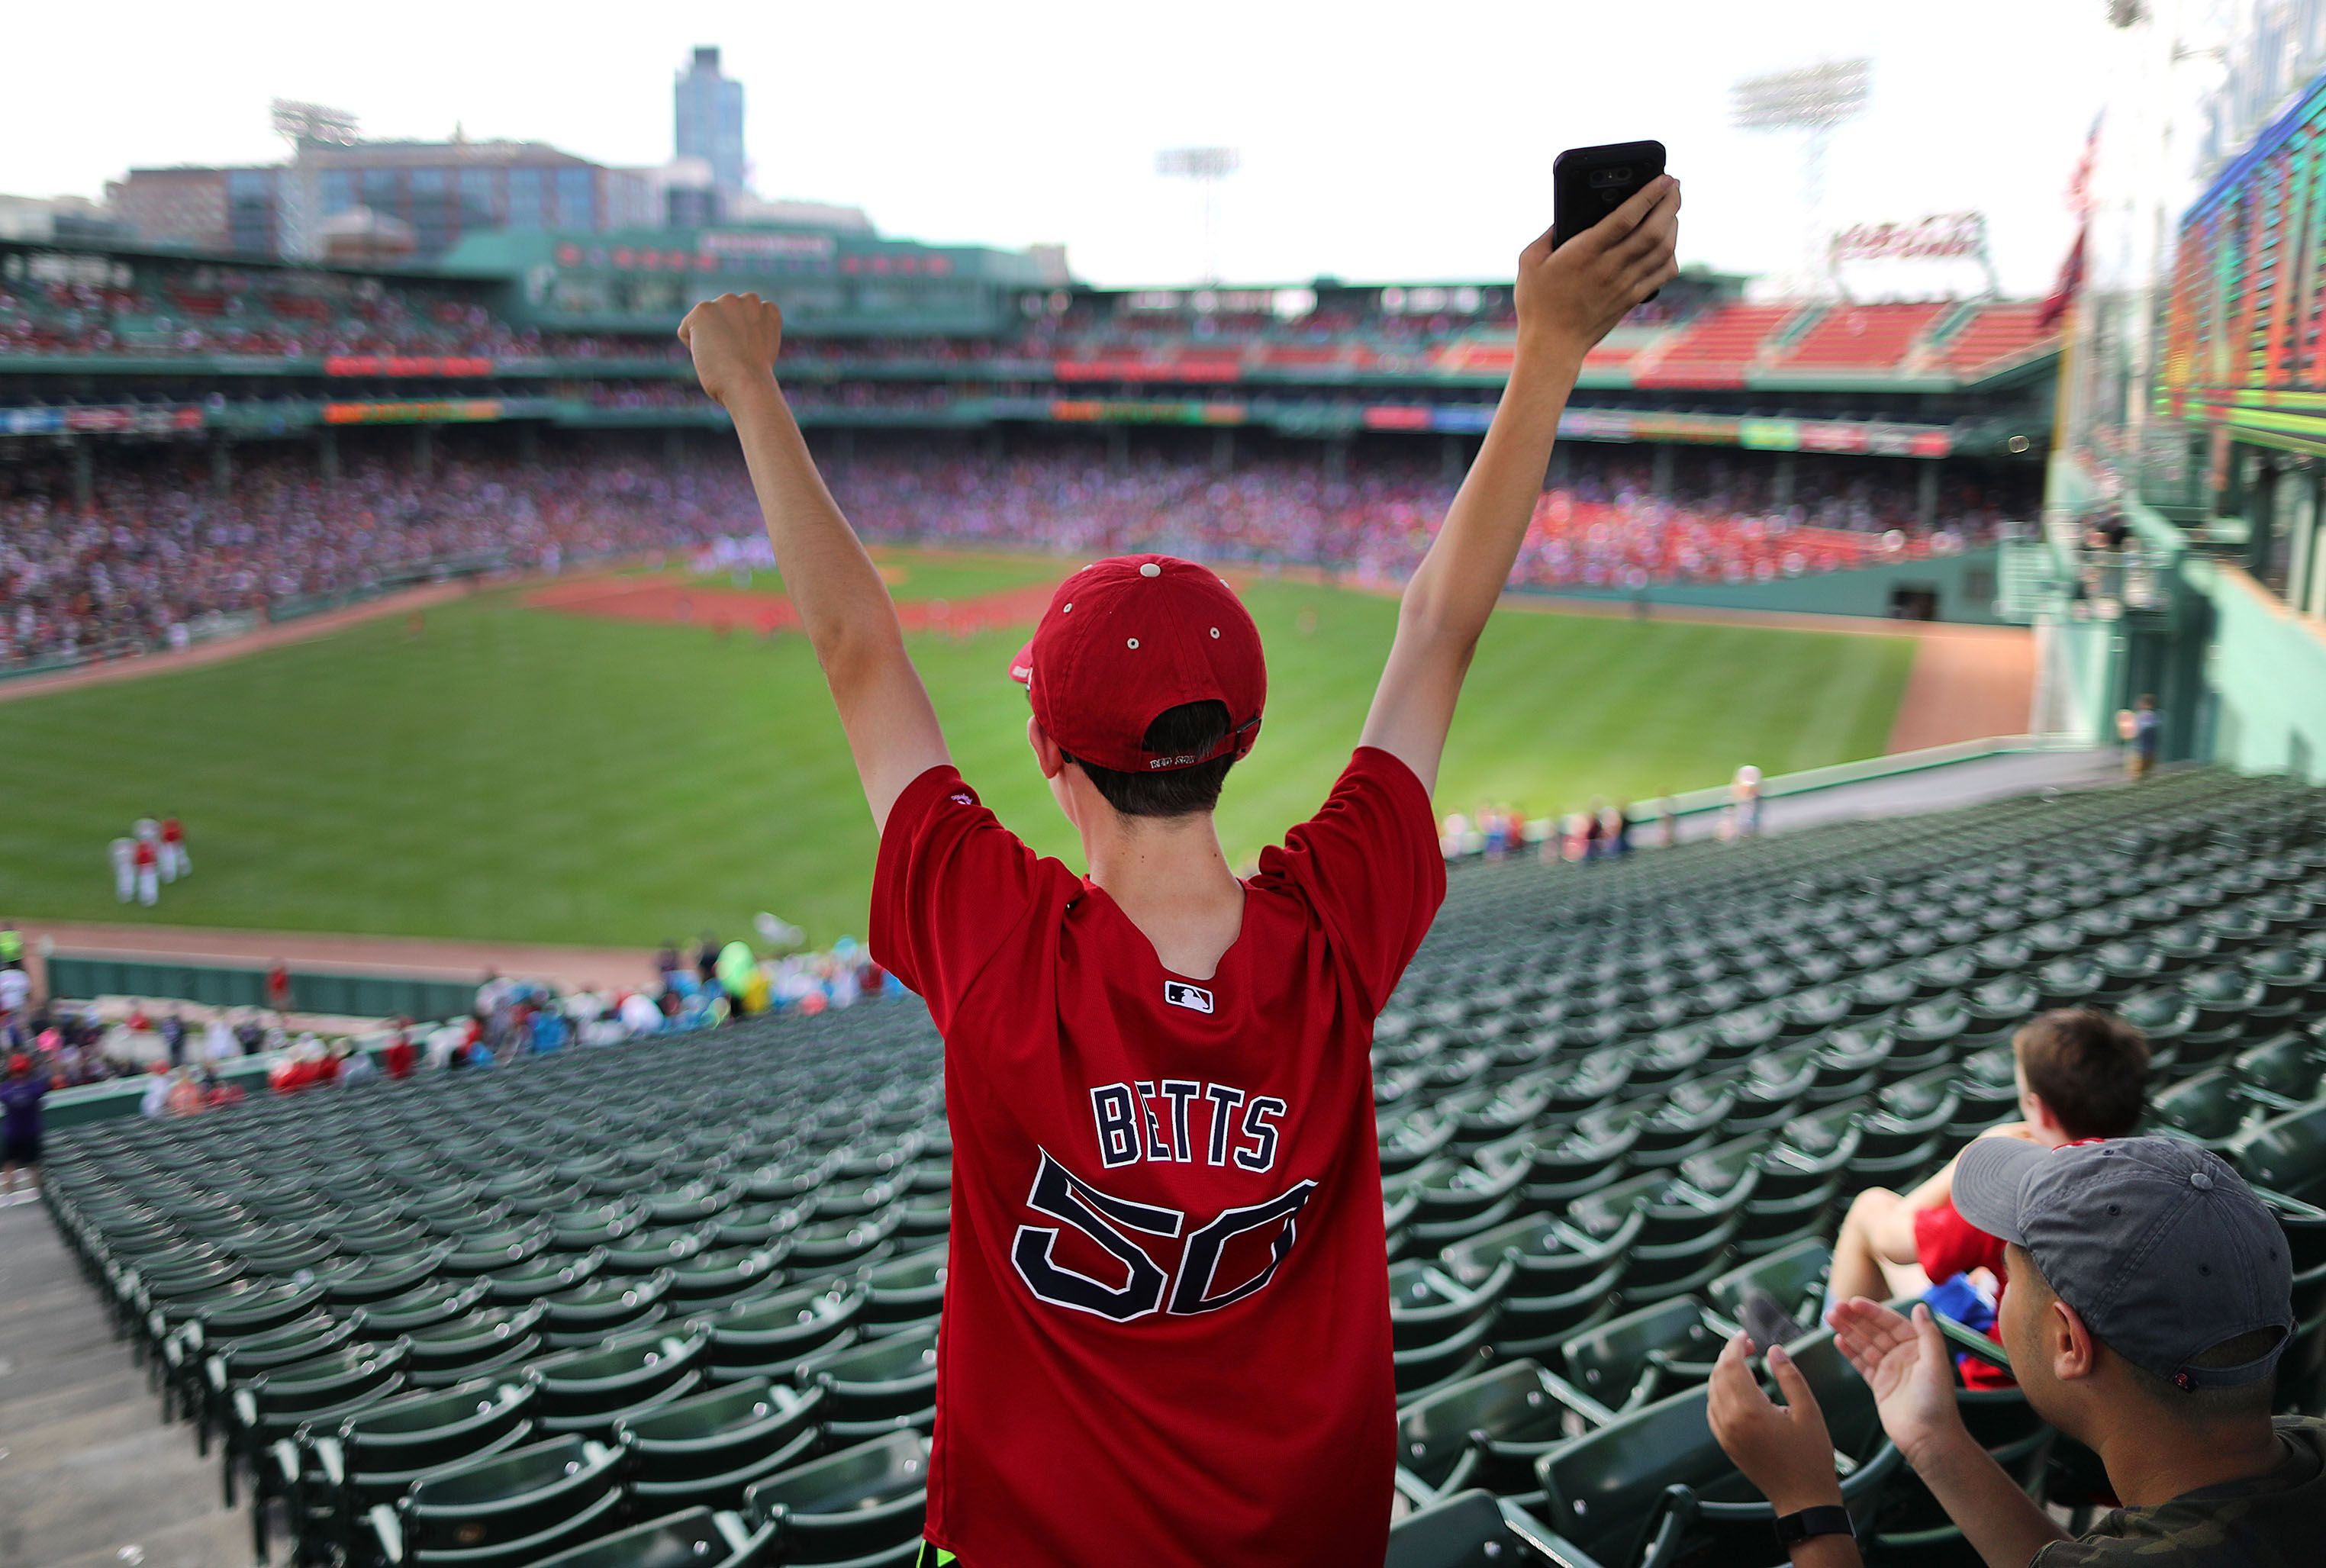 $5 tickets, $1 dogs, and 12 minutes of play: Red Sox fans relished